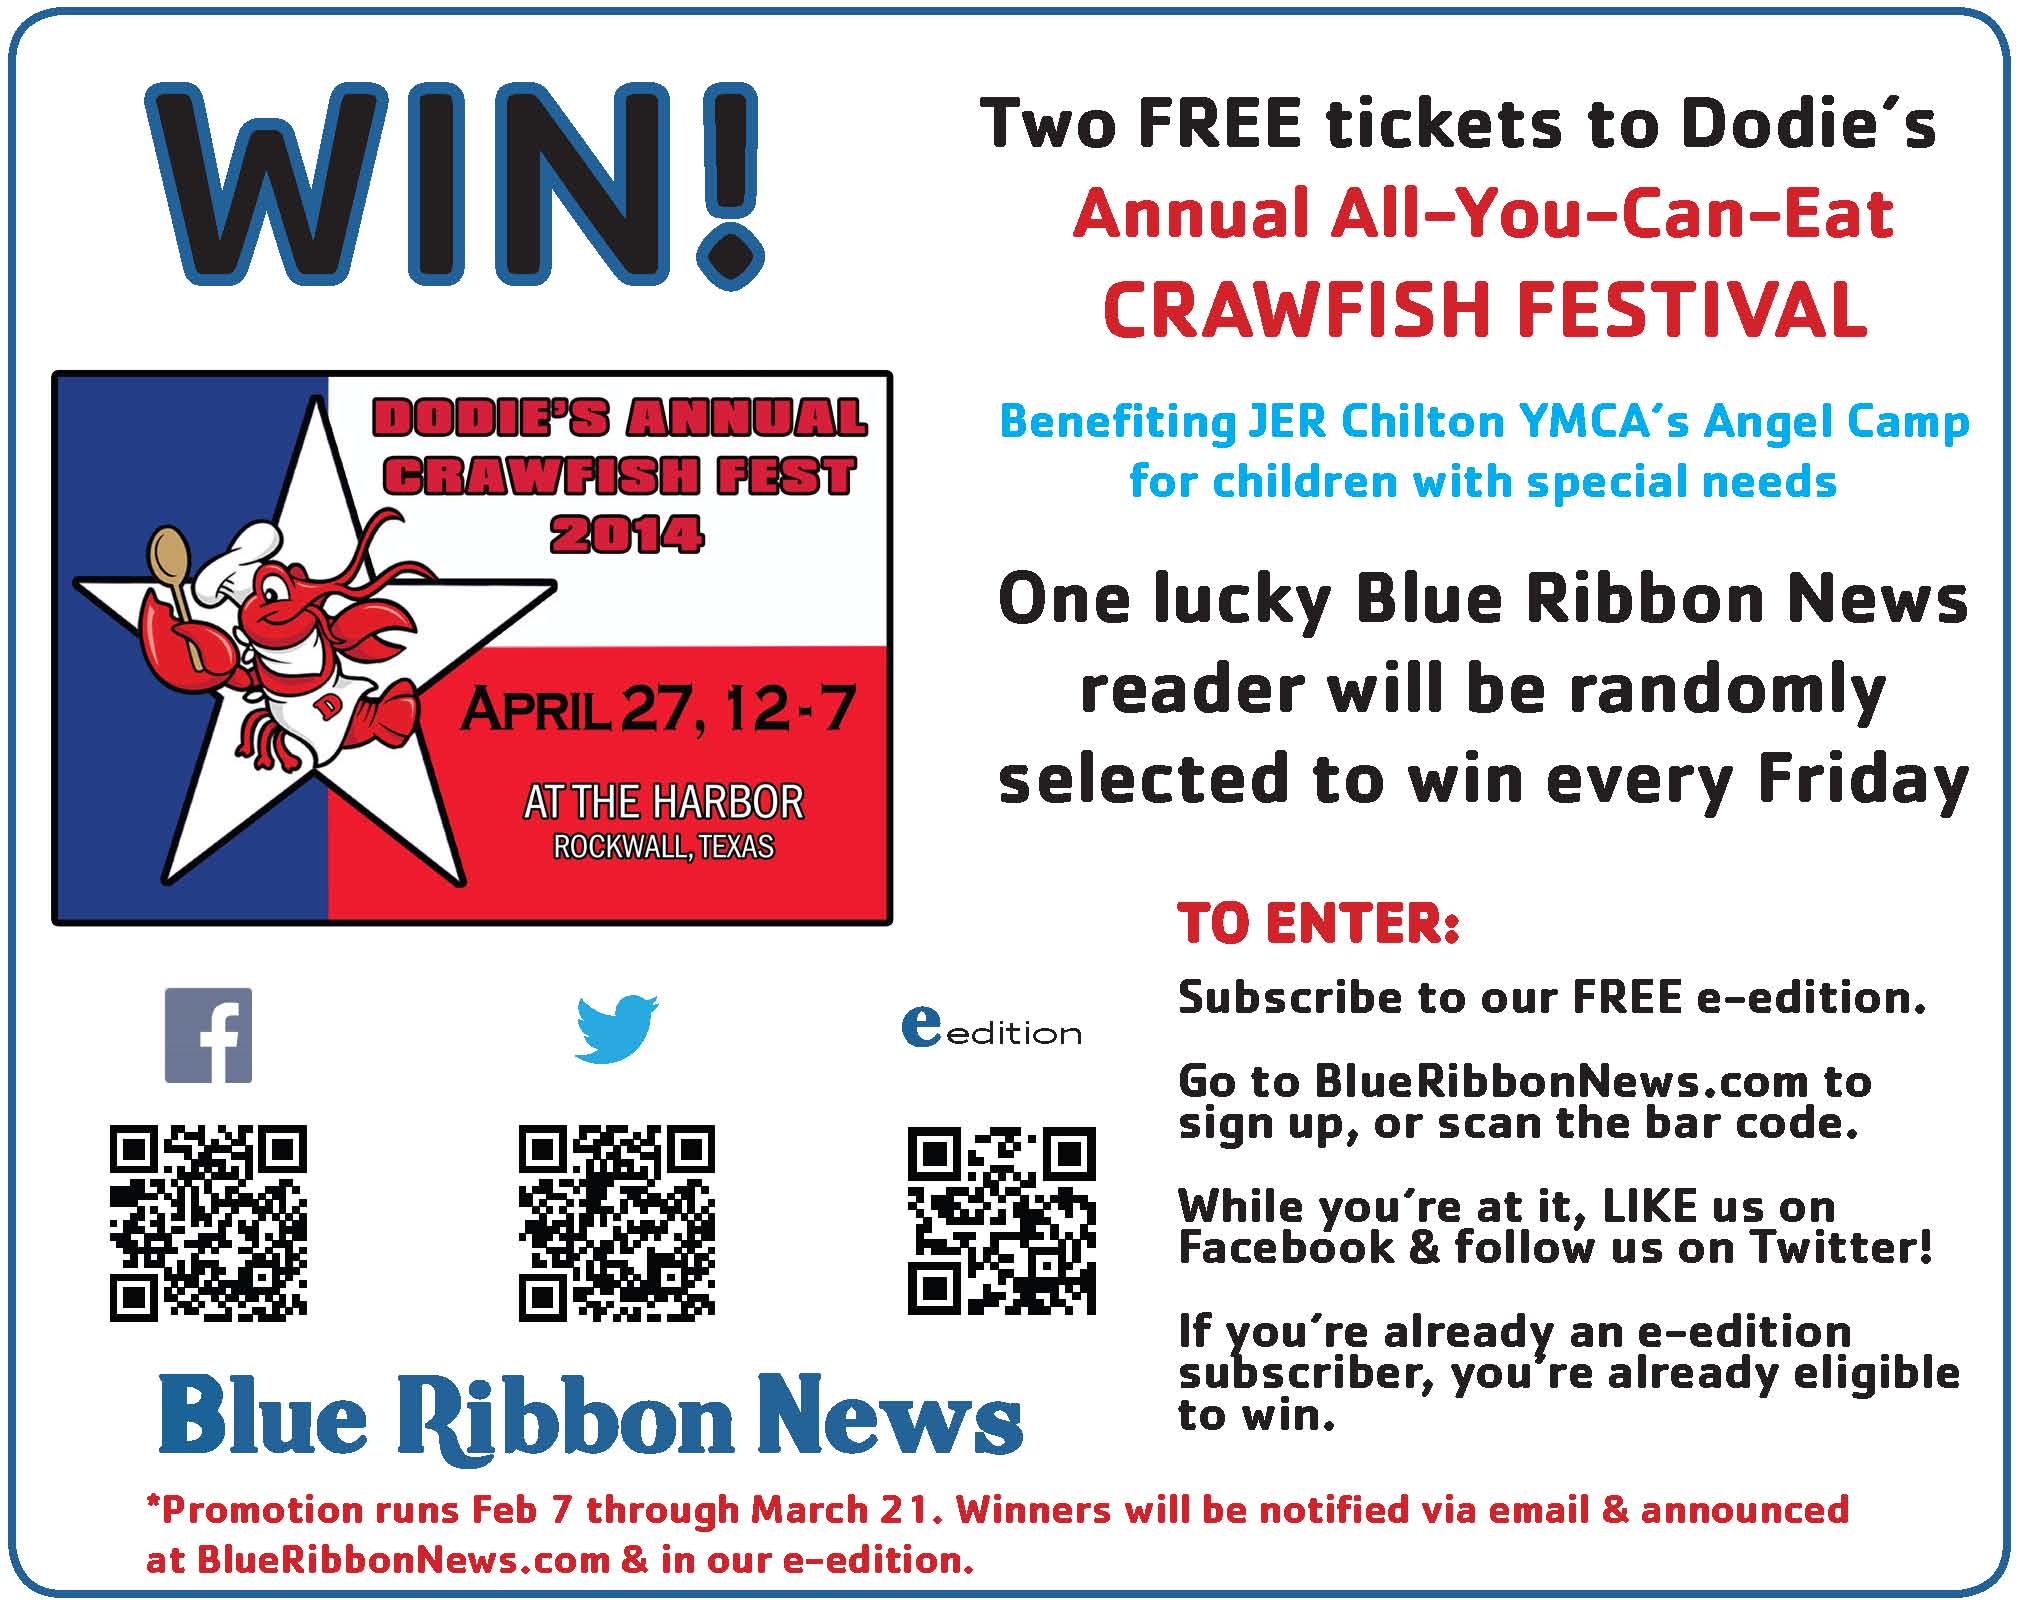 Win free tickets to Dodie’s Annual Crawfish Fest at Rockwall Harbor